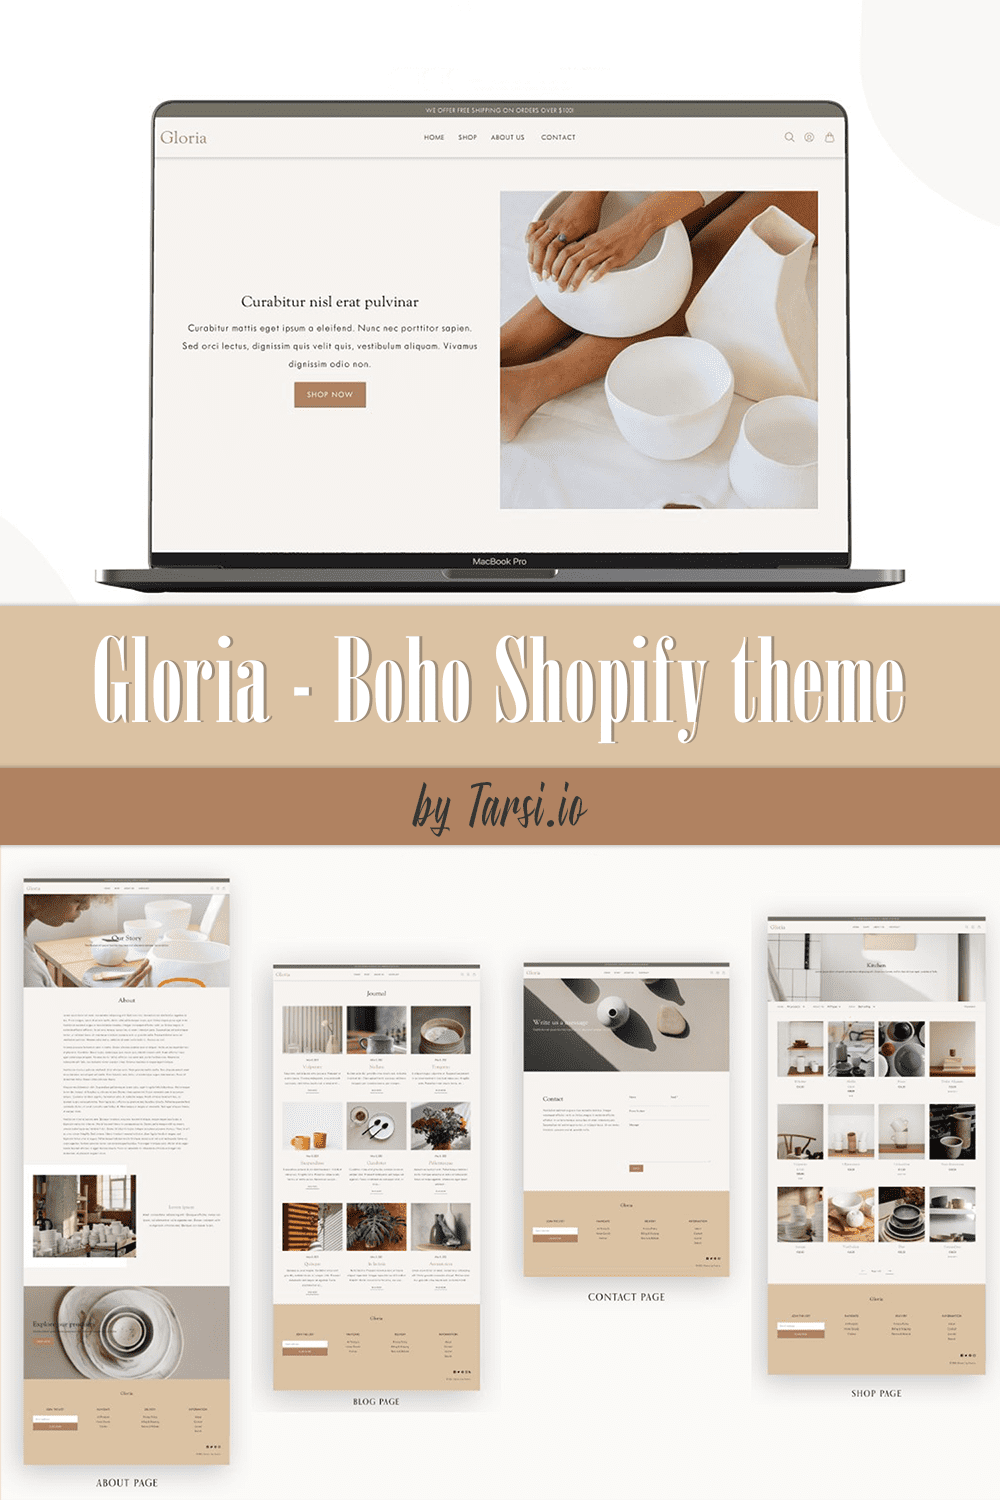 Image pack of amazing shopify theme pages.